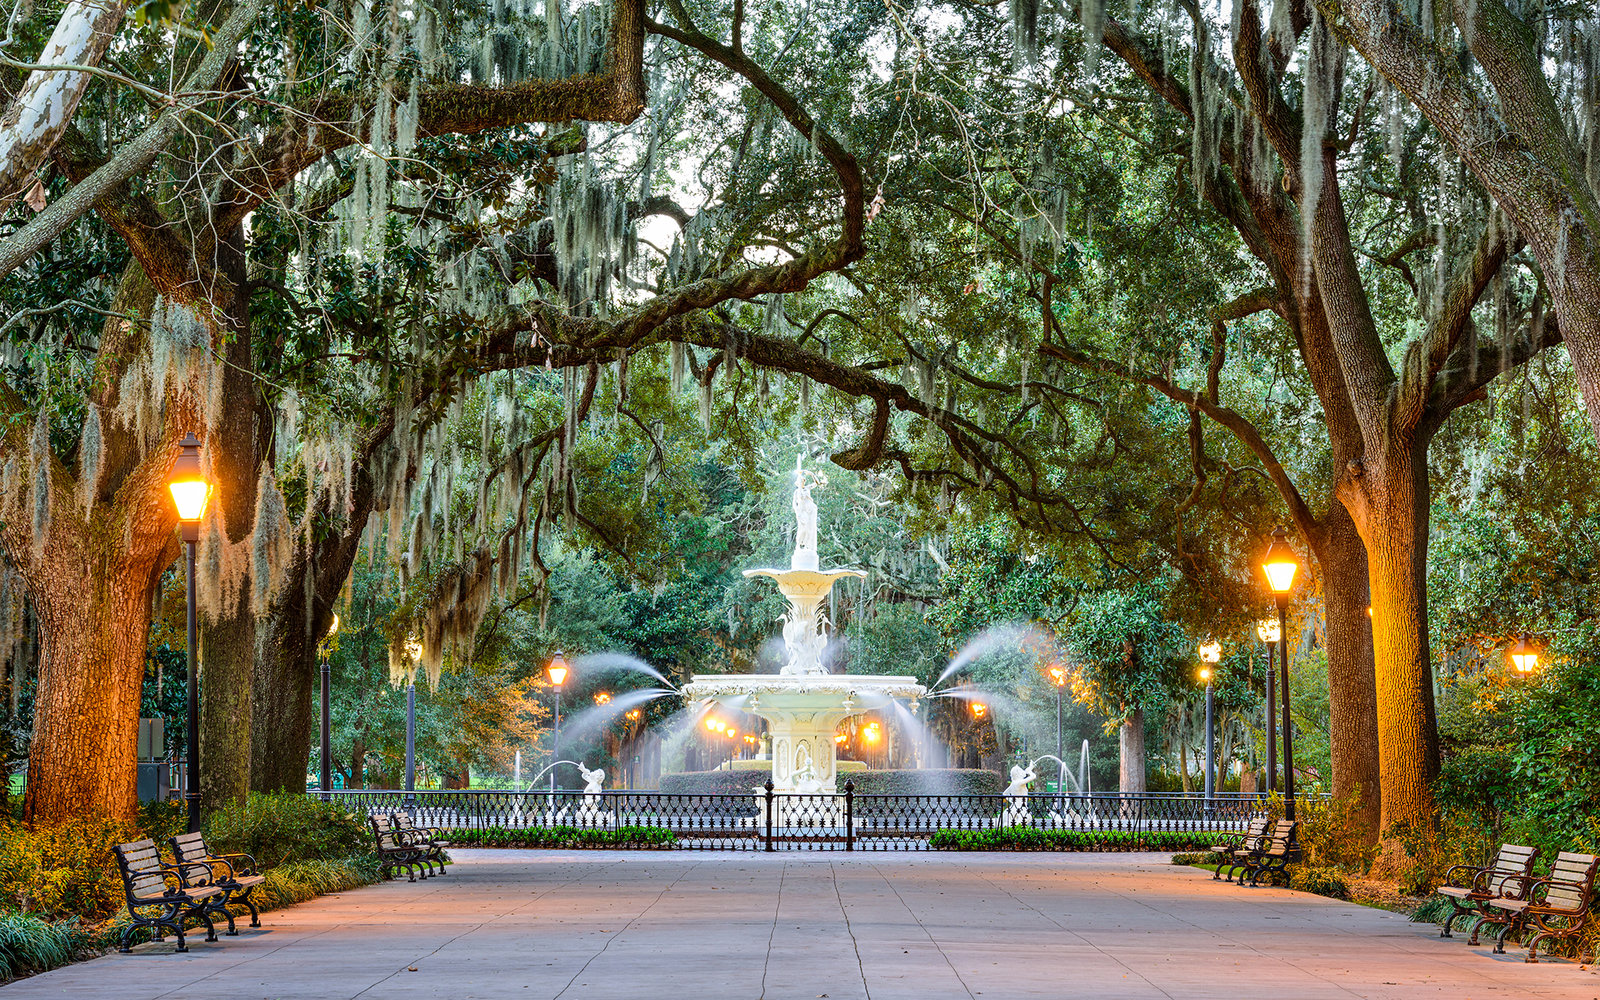 Now through May 15th, enter the Travel Channel Savannah Vacation Sweepstakes daily for your chance to win $10,000!